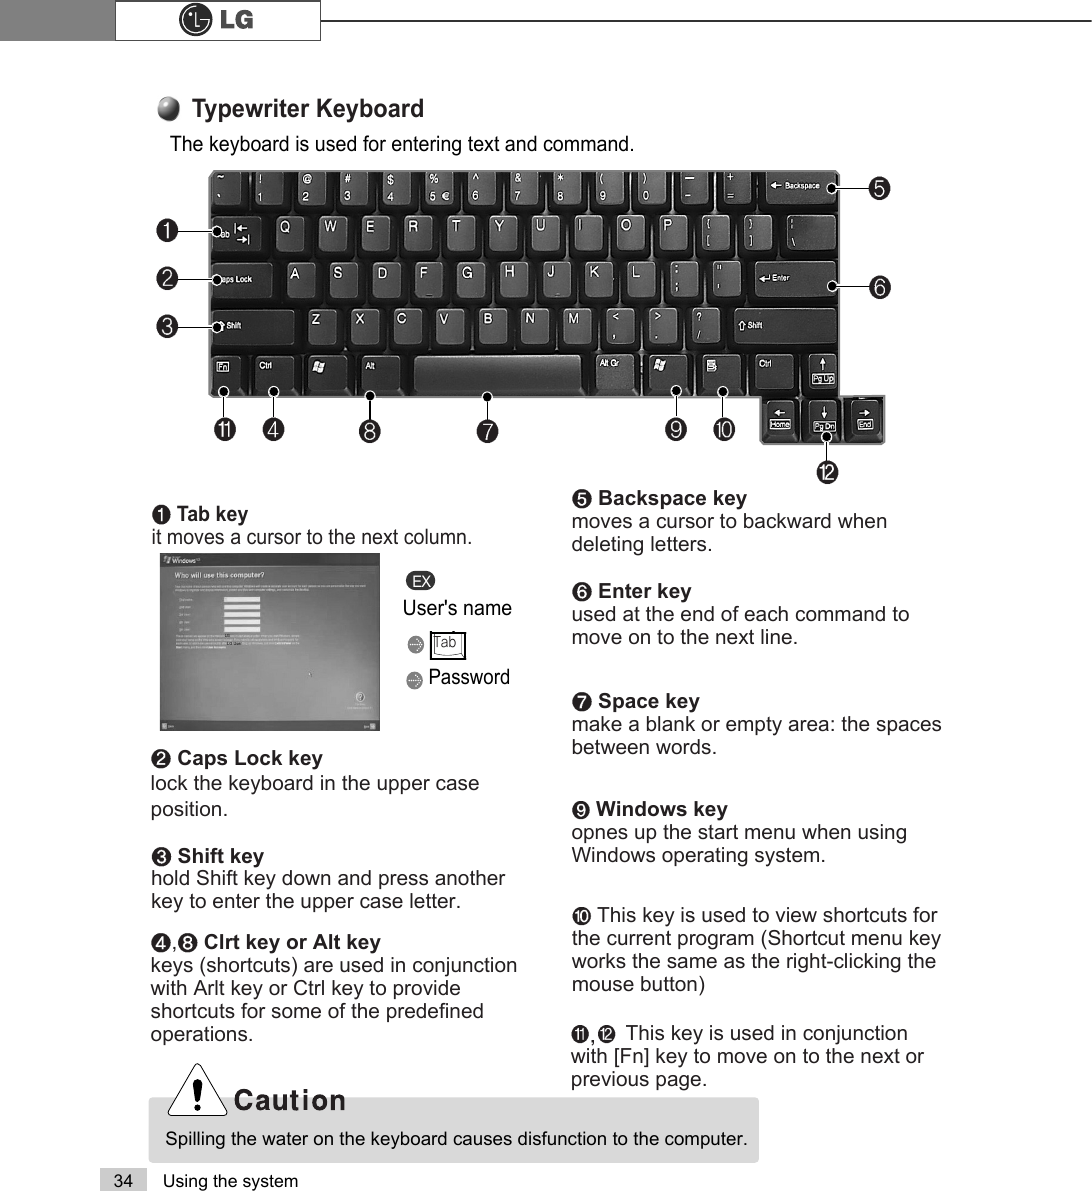 34 Using the systemThe keyboard is used for entering text and command.  ℘Tab keyit moves a cursor to the next column.EXUser&apos;s namePassword7DETypewriter KeyboardLGLG User⌆ℚℙ℘℟℡ℛ⌅℞℠ℝℜℝEnter keyused at the end of each command tomove on to the next line.ℜBackspace keymoves a cursor to backward whendeleting letters.ℙCaps Lock keylock the keyboard in the upper case position.℞Space keymake a blank or empty area: the spacesbetween words.℠Windows keyopnes up the start menu when usingWindows operating system.ℚShift keyhold Shift key down and press anotherkey to enter the upper case letter.ℛ,℟Clrt key or Alt keykeys (shortcuts) are used in conjunctionwith Arlt key or Ctrl key to provideshortcuts for some of the predefinedoperations.℡This key is used to view shortcuts forthe current program (Shortcut menu keyworks the same as the right-clicking themouse button)⌅⌆This key is used in conjunctionwith [Fn] key to move on to the next orprevious page.Spilling the water on the keyboard causes disfunction to the computer.